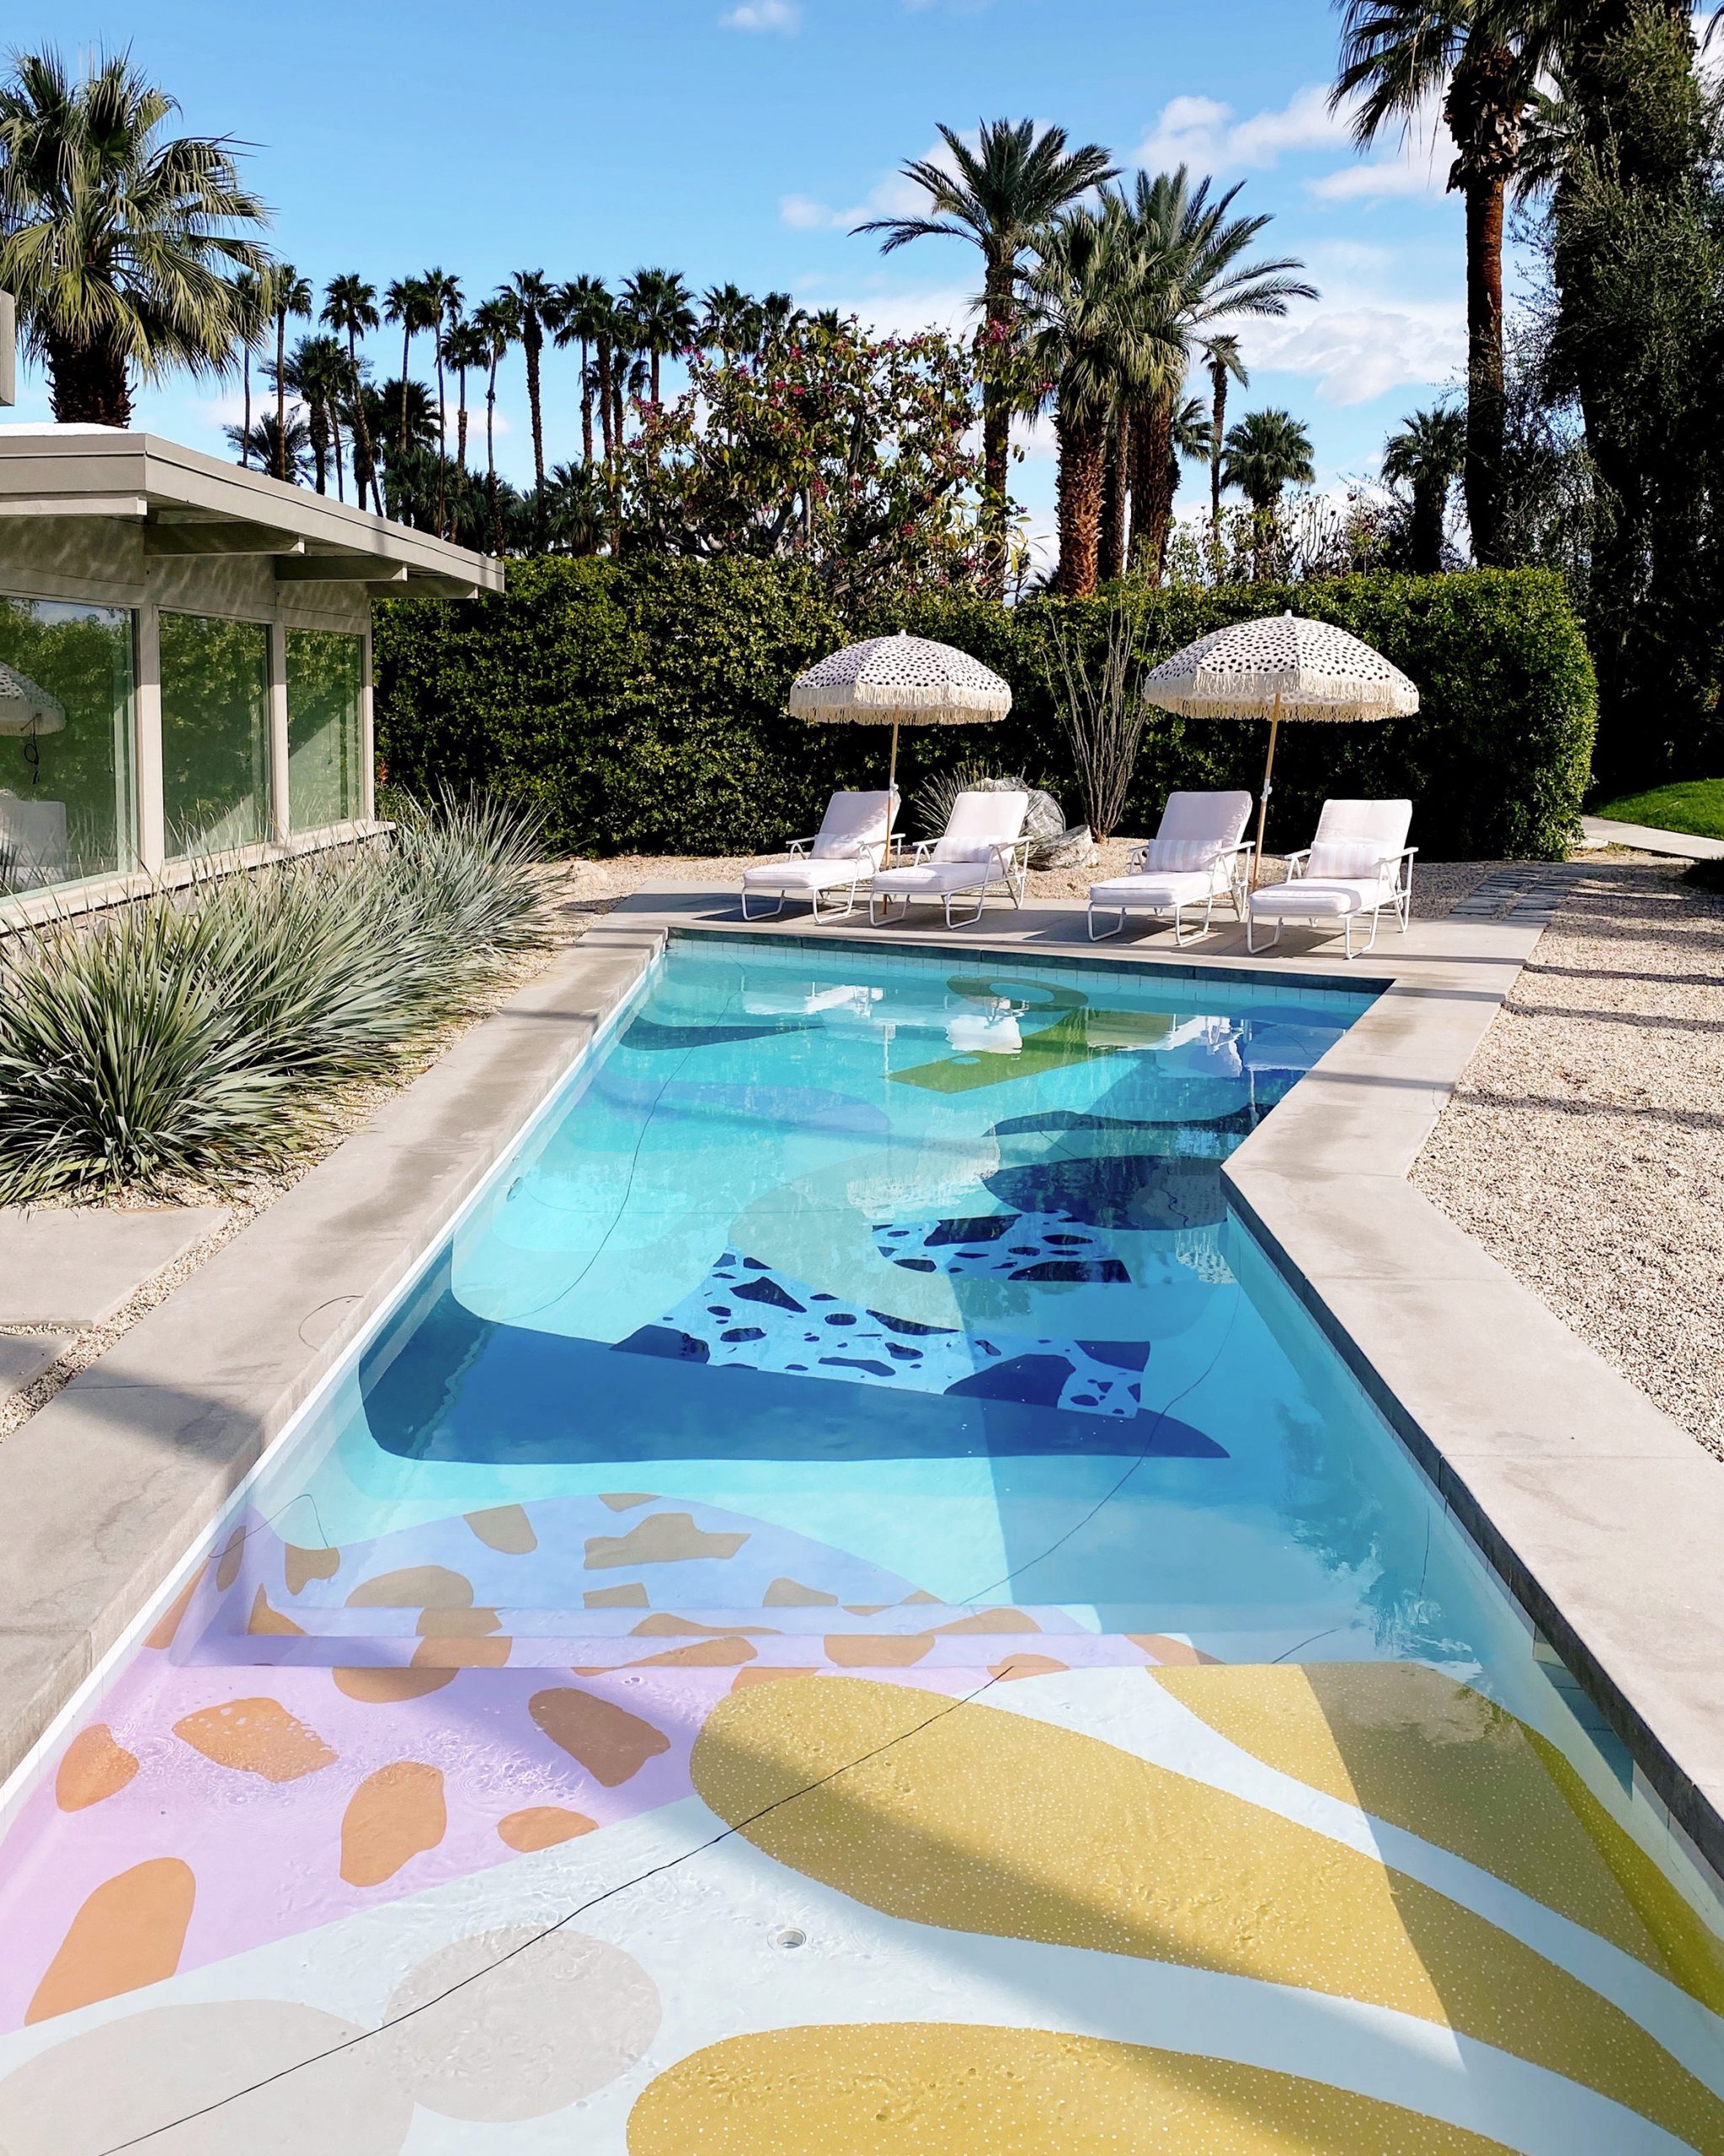 The hand-painted swimming pool at Marrow House by Alex Proba